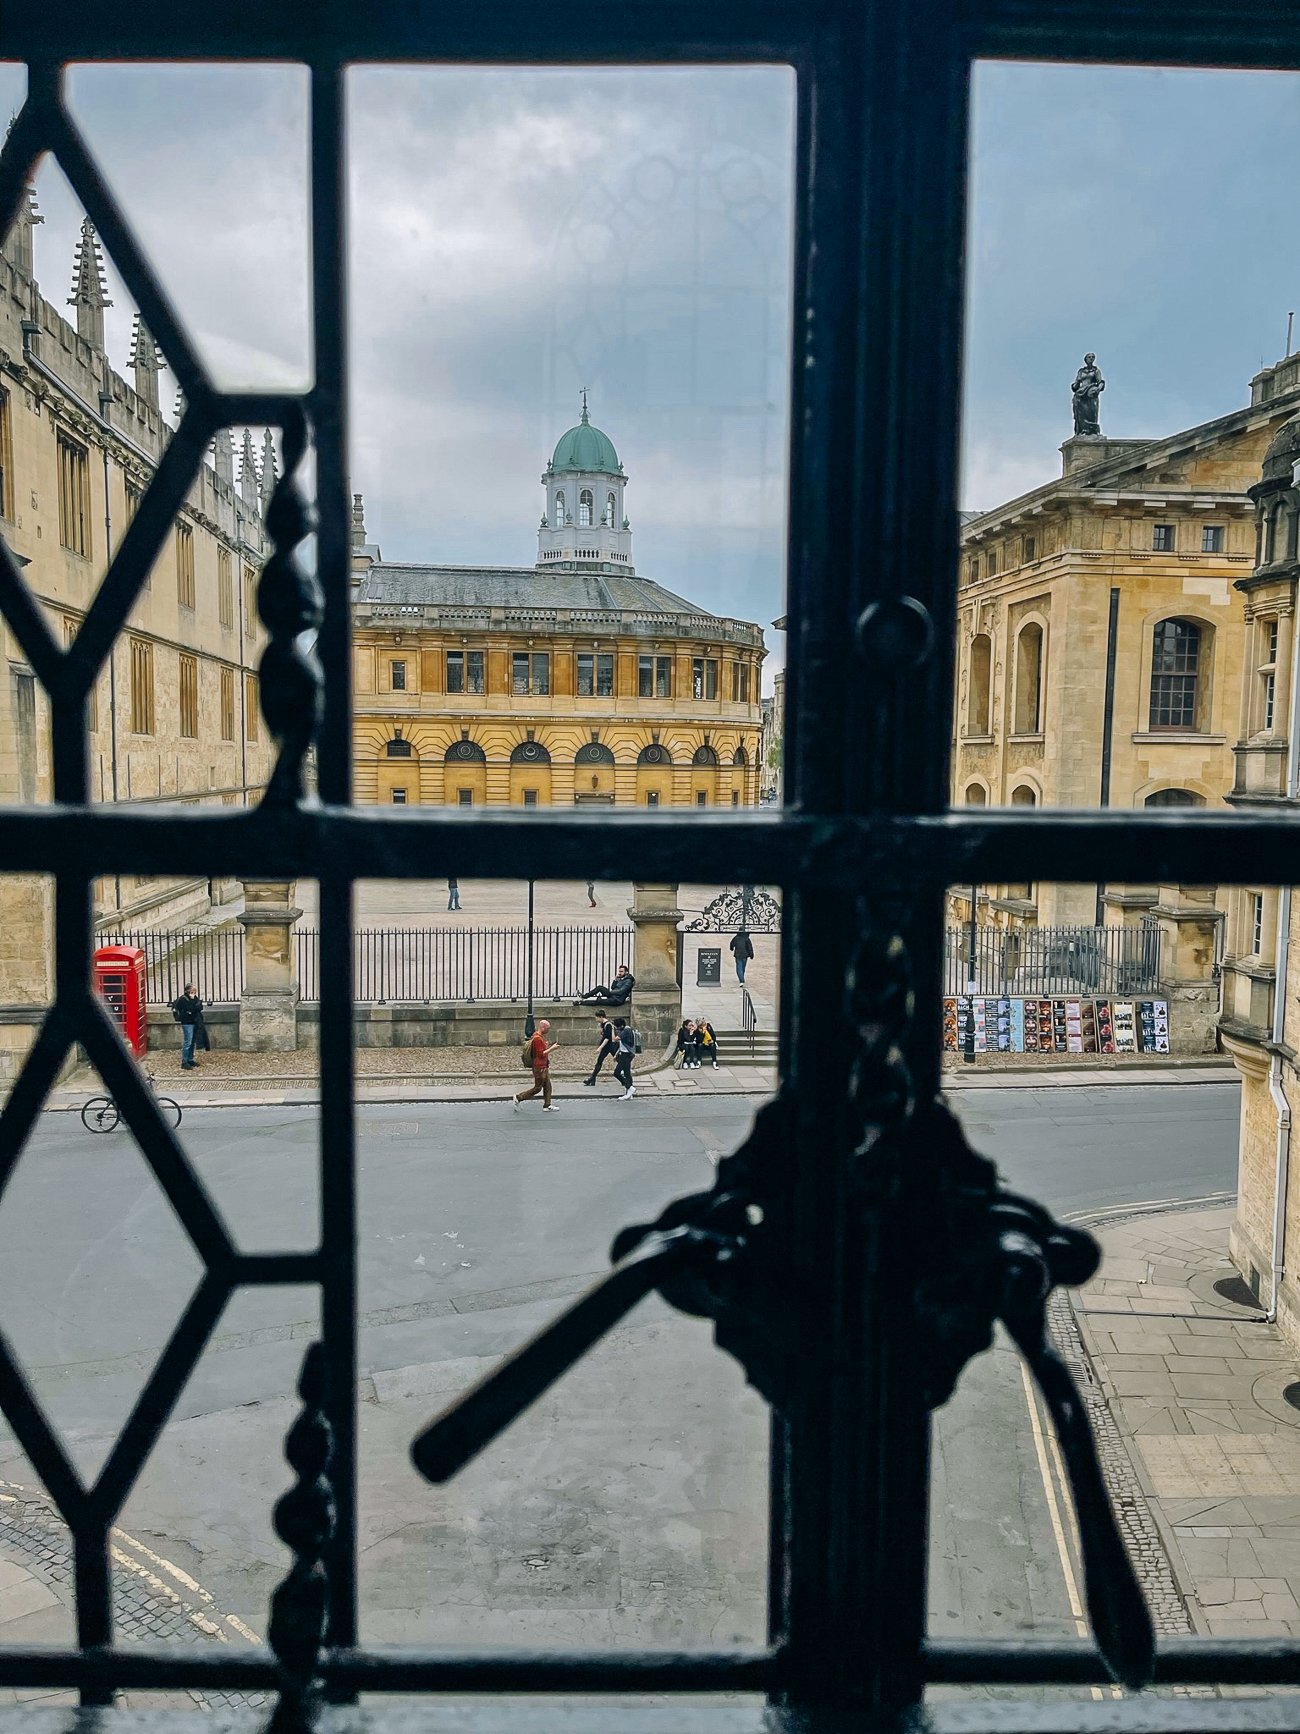 the view of the Sheldonian Theatre through at window at Oxford College